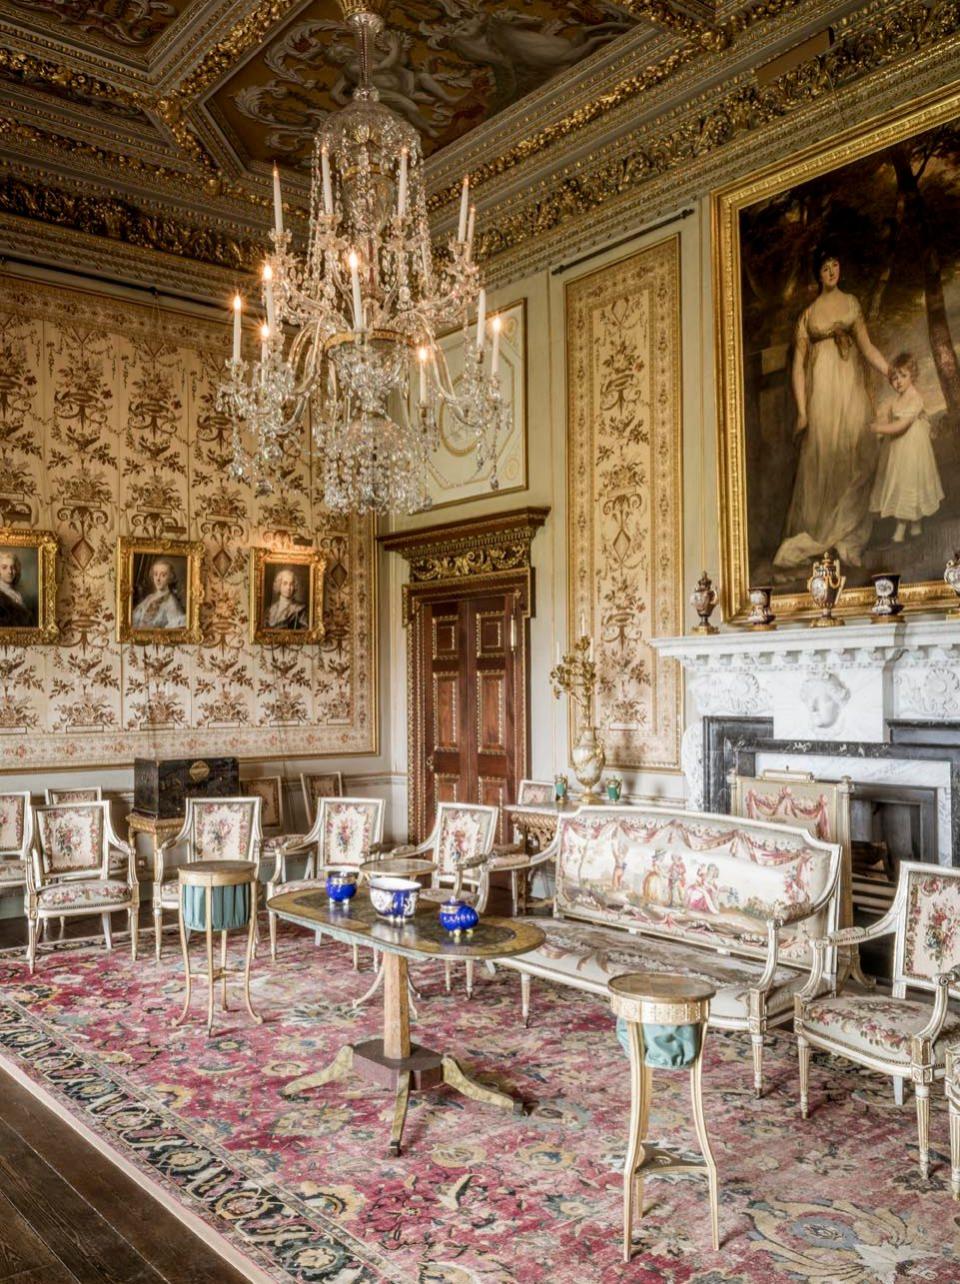 The White Drawing Room walls are covered in woven silk. Much of the original furniture and fabrics are still in place  - Credit: Mark C Flaherty 